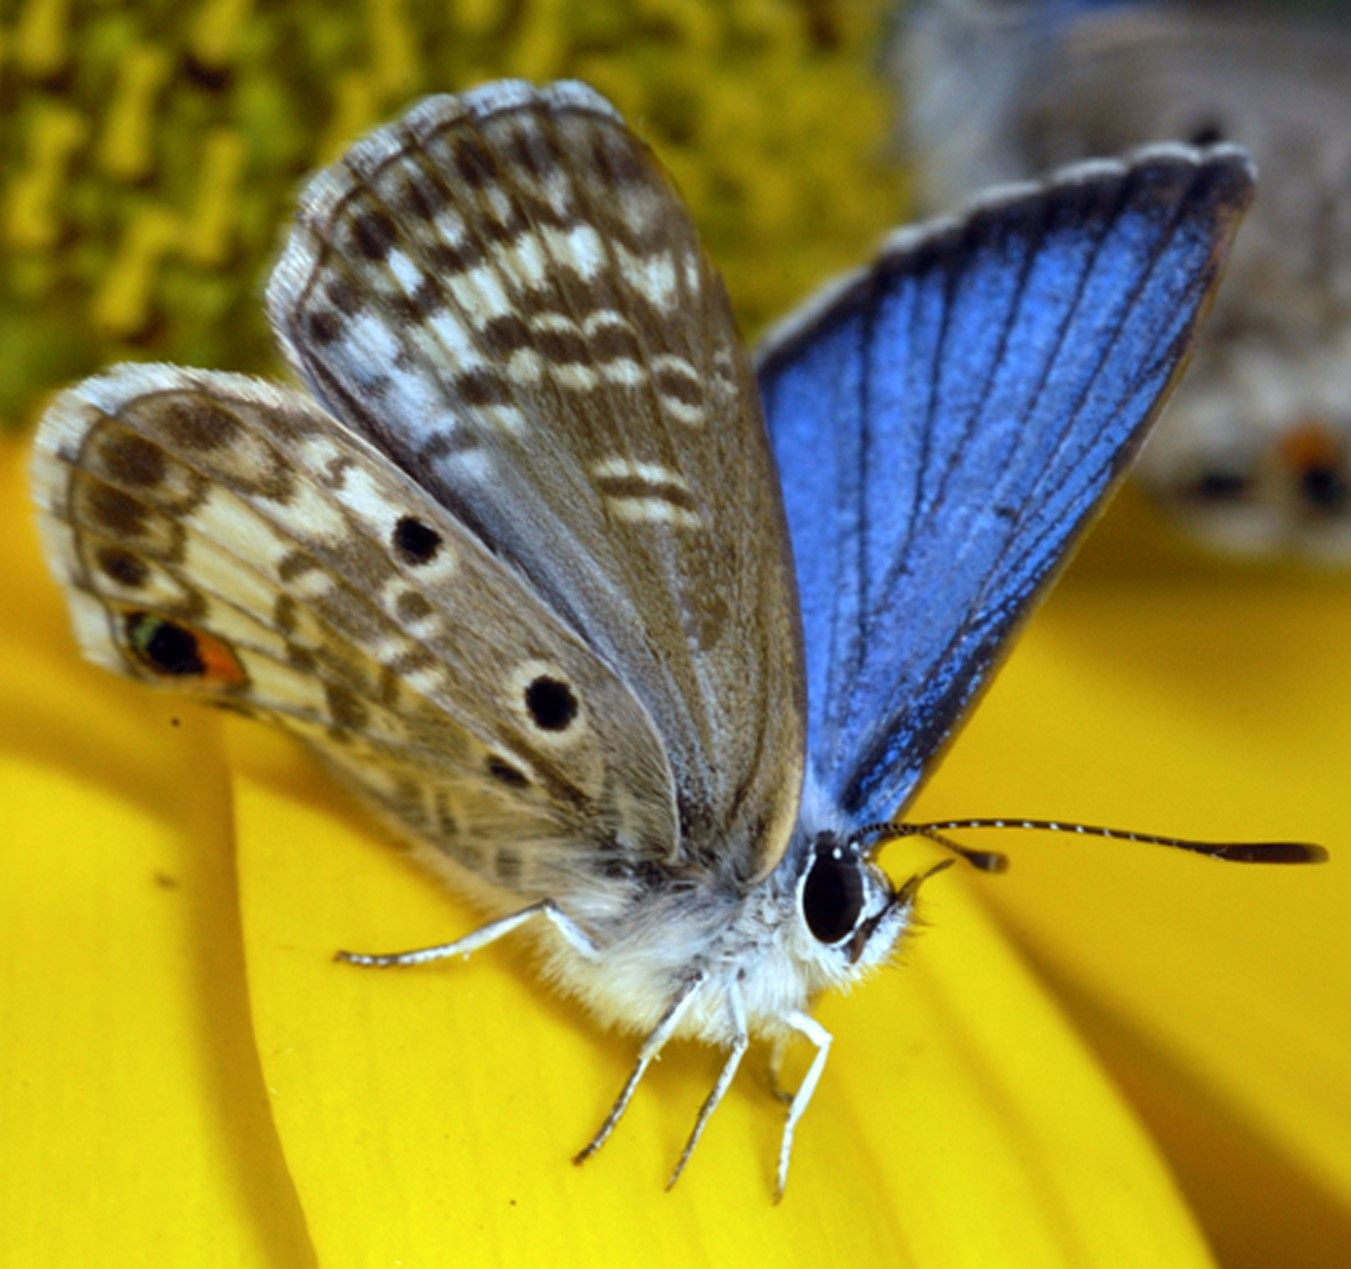 The Miami blue butterfly (Cyclargus thomasi bethunebakeri) is a federally endangered species. Impacts to this species’ host plant caused by foraging green iguanas (Iguana iguana) may have contributed to the extirpation of this unique butterfly at Bahia Honda State Park in the Florida Keys. 